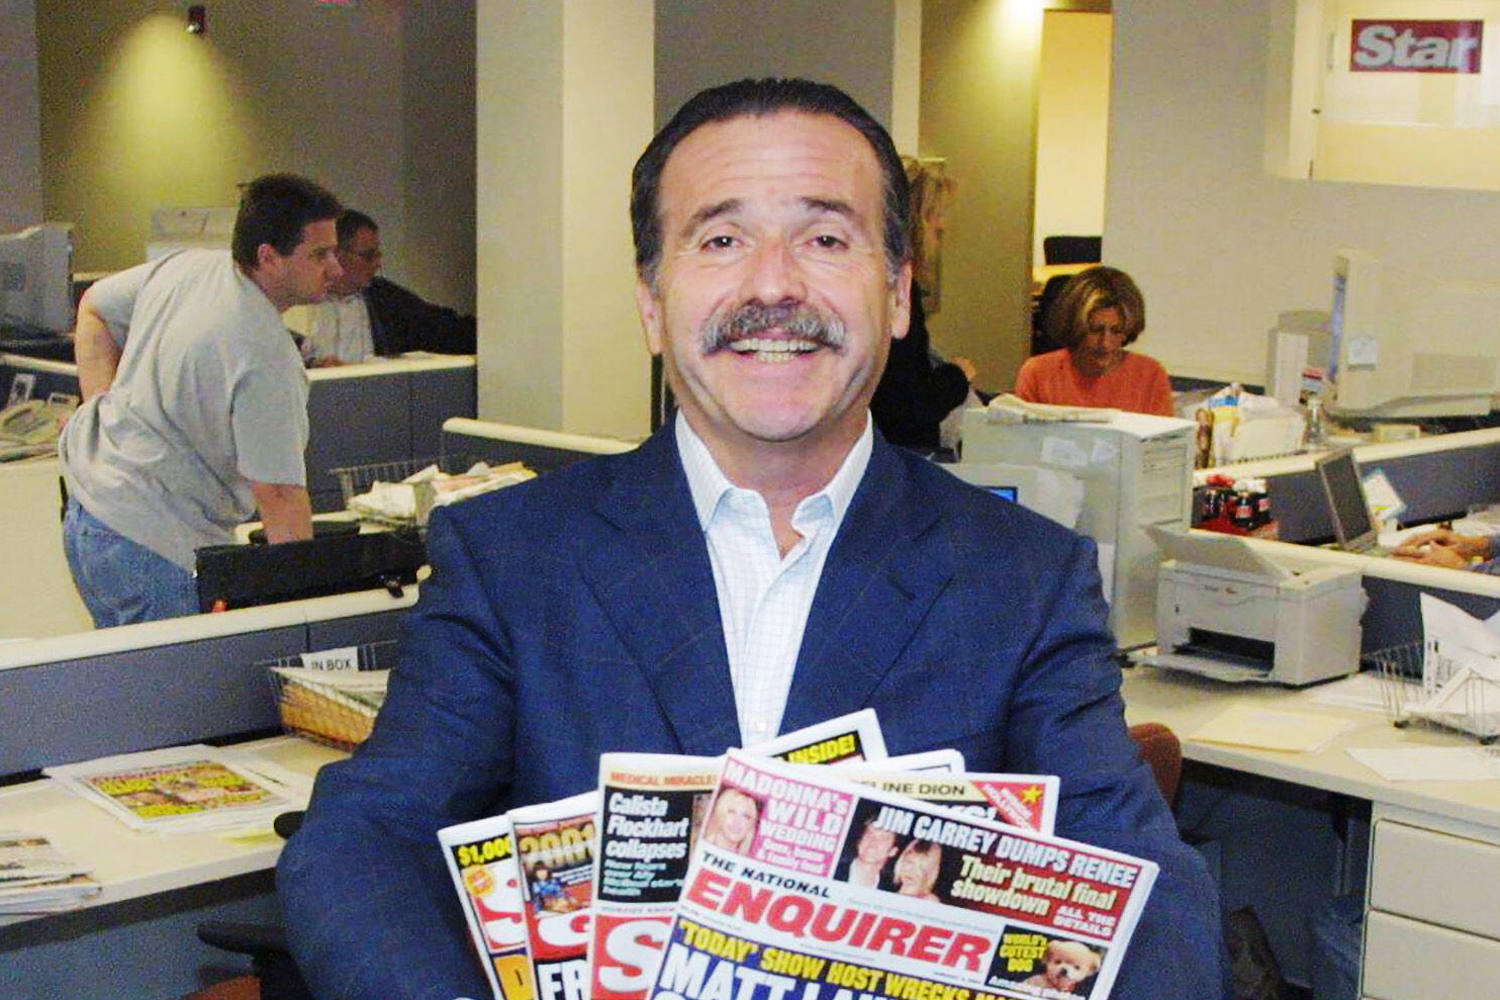 David Pecker testimony at Trump trial reveals the seedy underbelly of his tabloid journalism